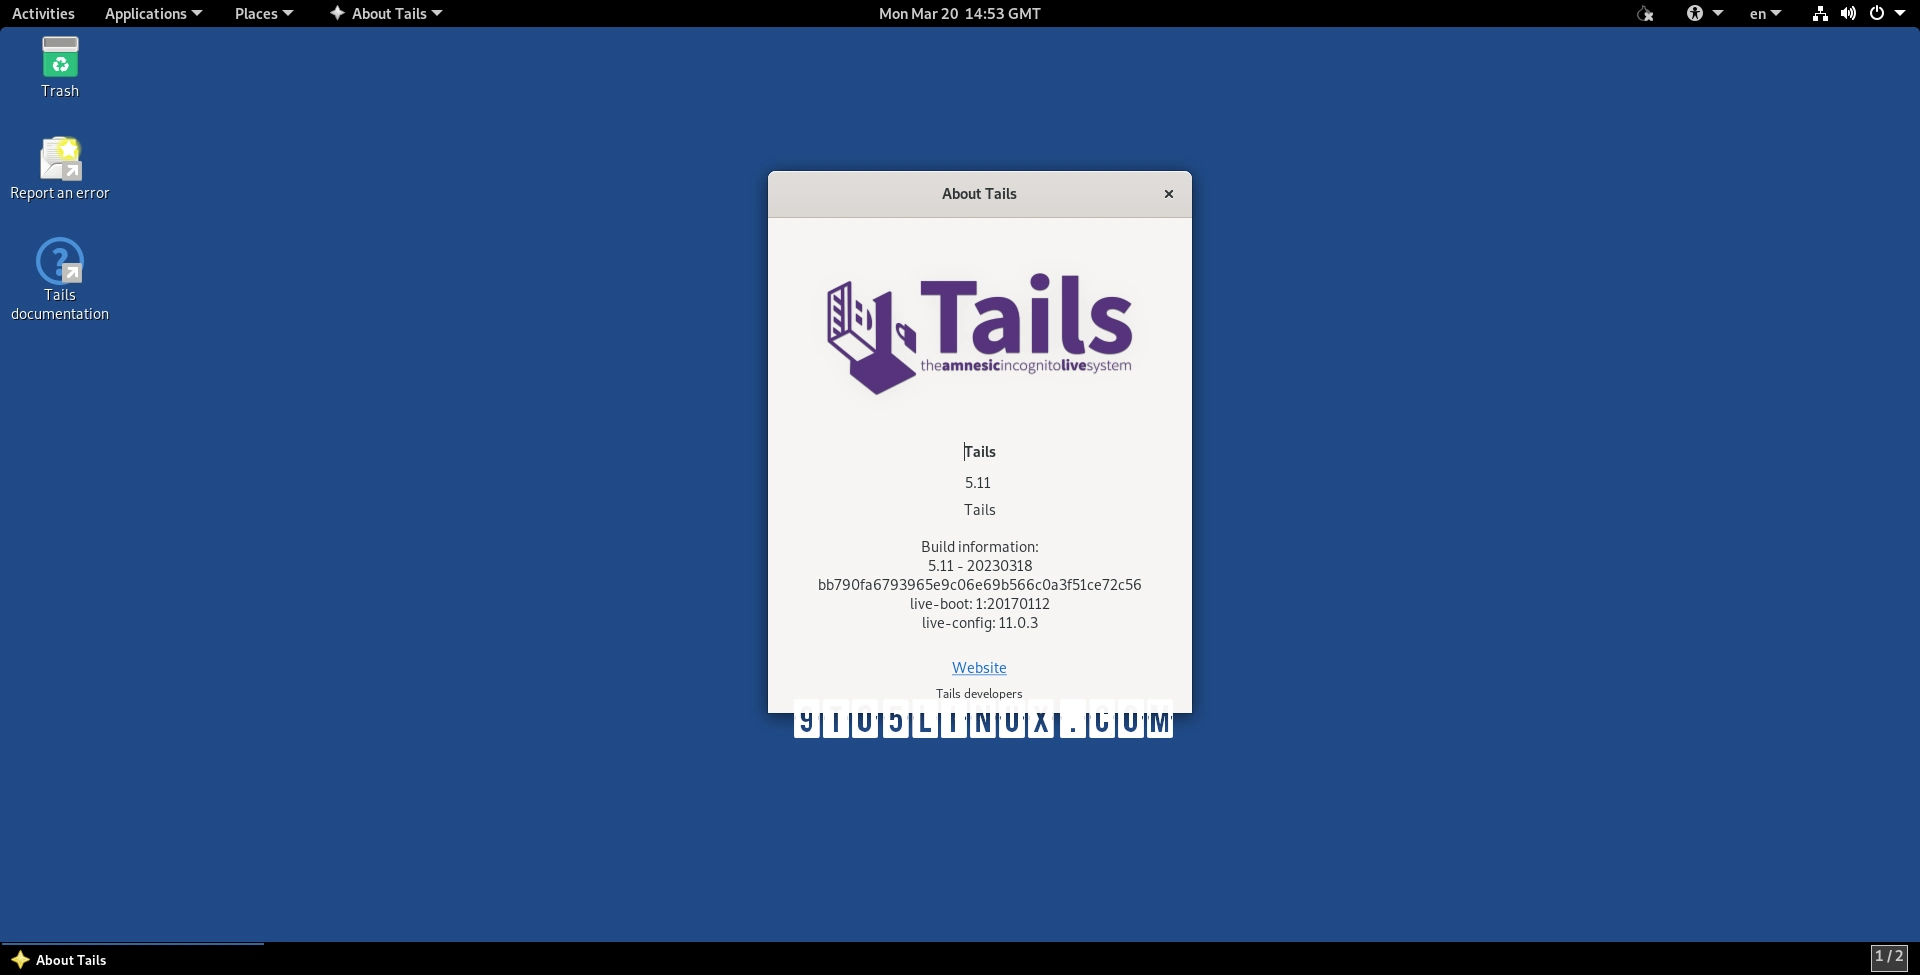 Tails 5.11 Amnesic Incognito Live System Switches to ZRam and Linux Kernel 6.1 LTS